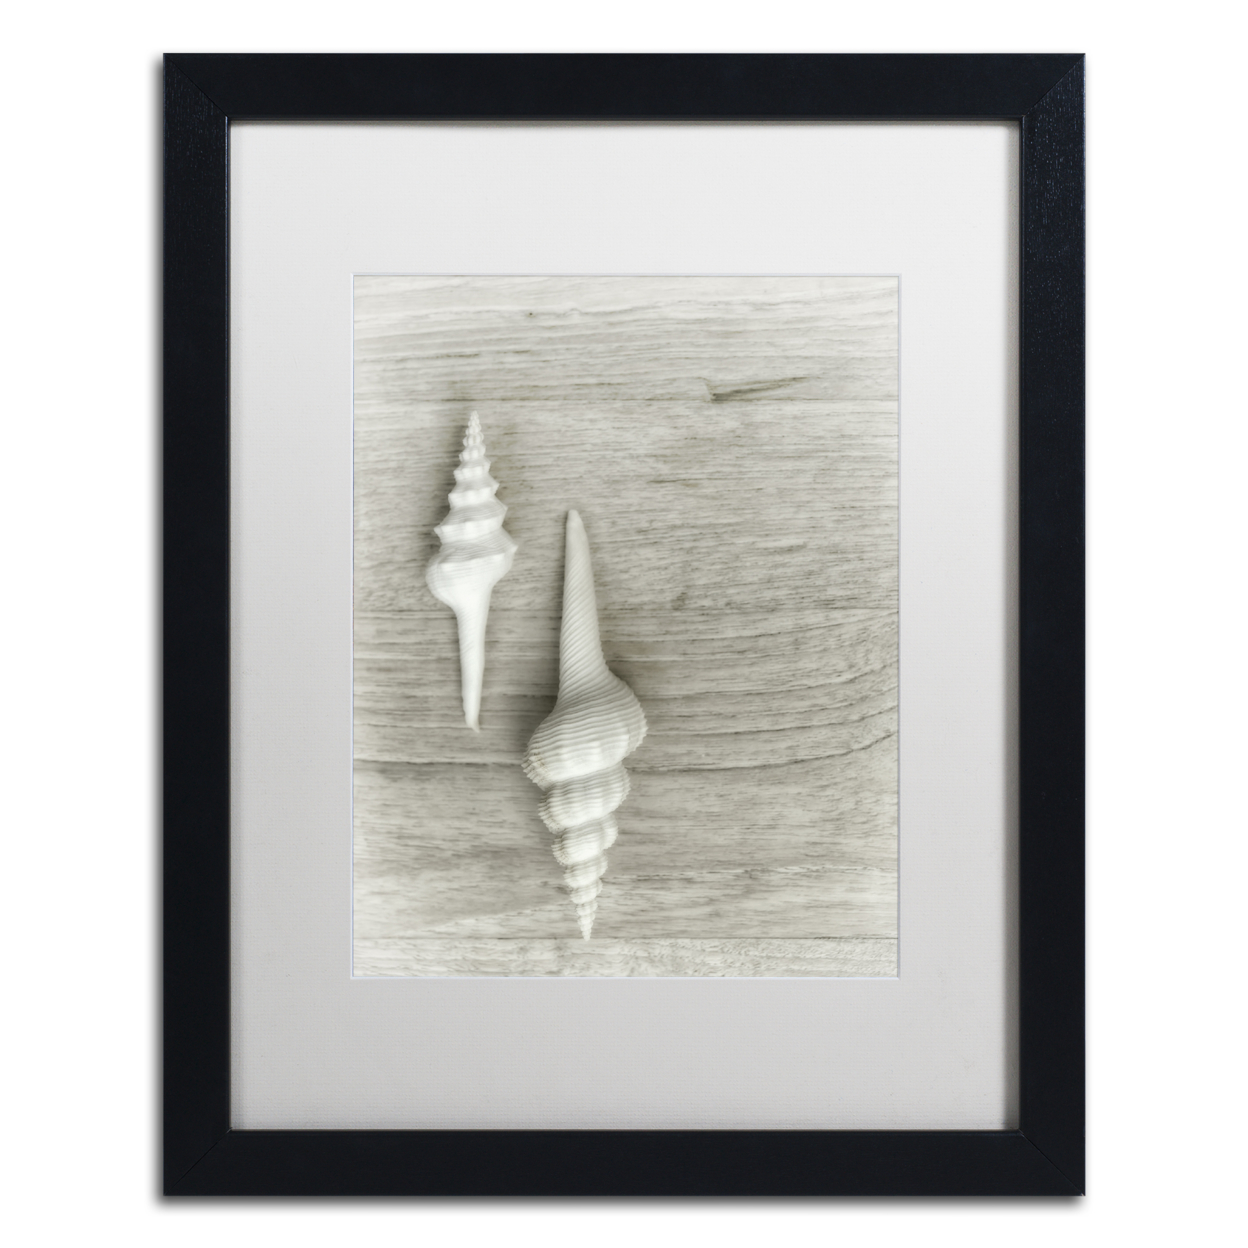 Cora Niele 'Two White Shells' Black Wooden Framed Art 18 X 22 Inches